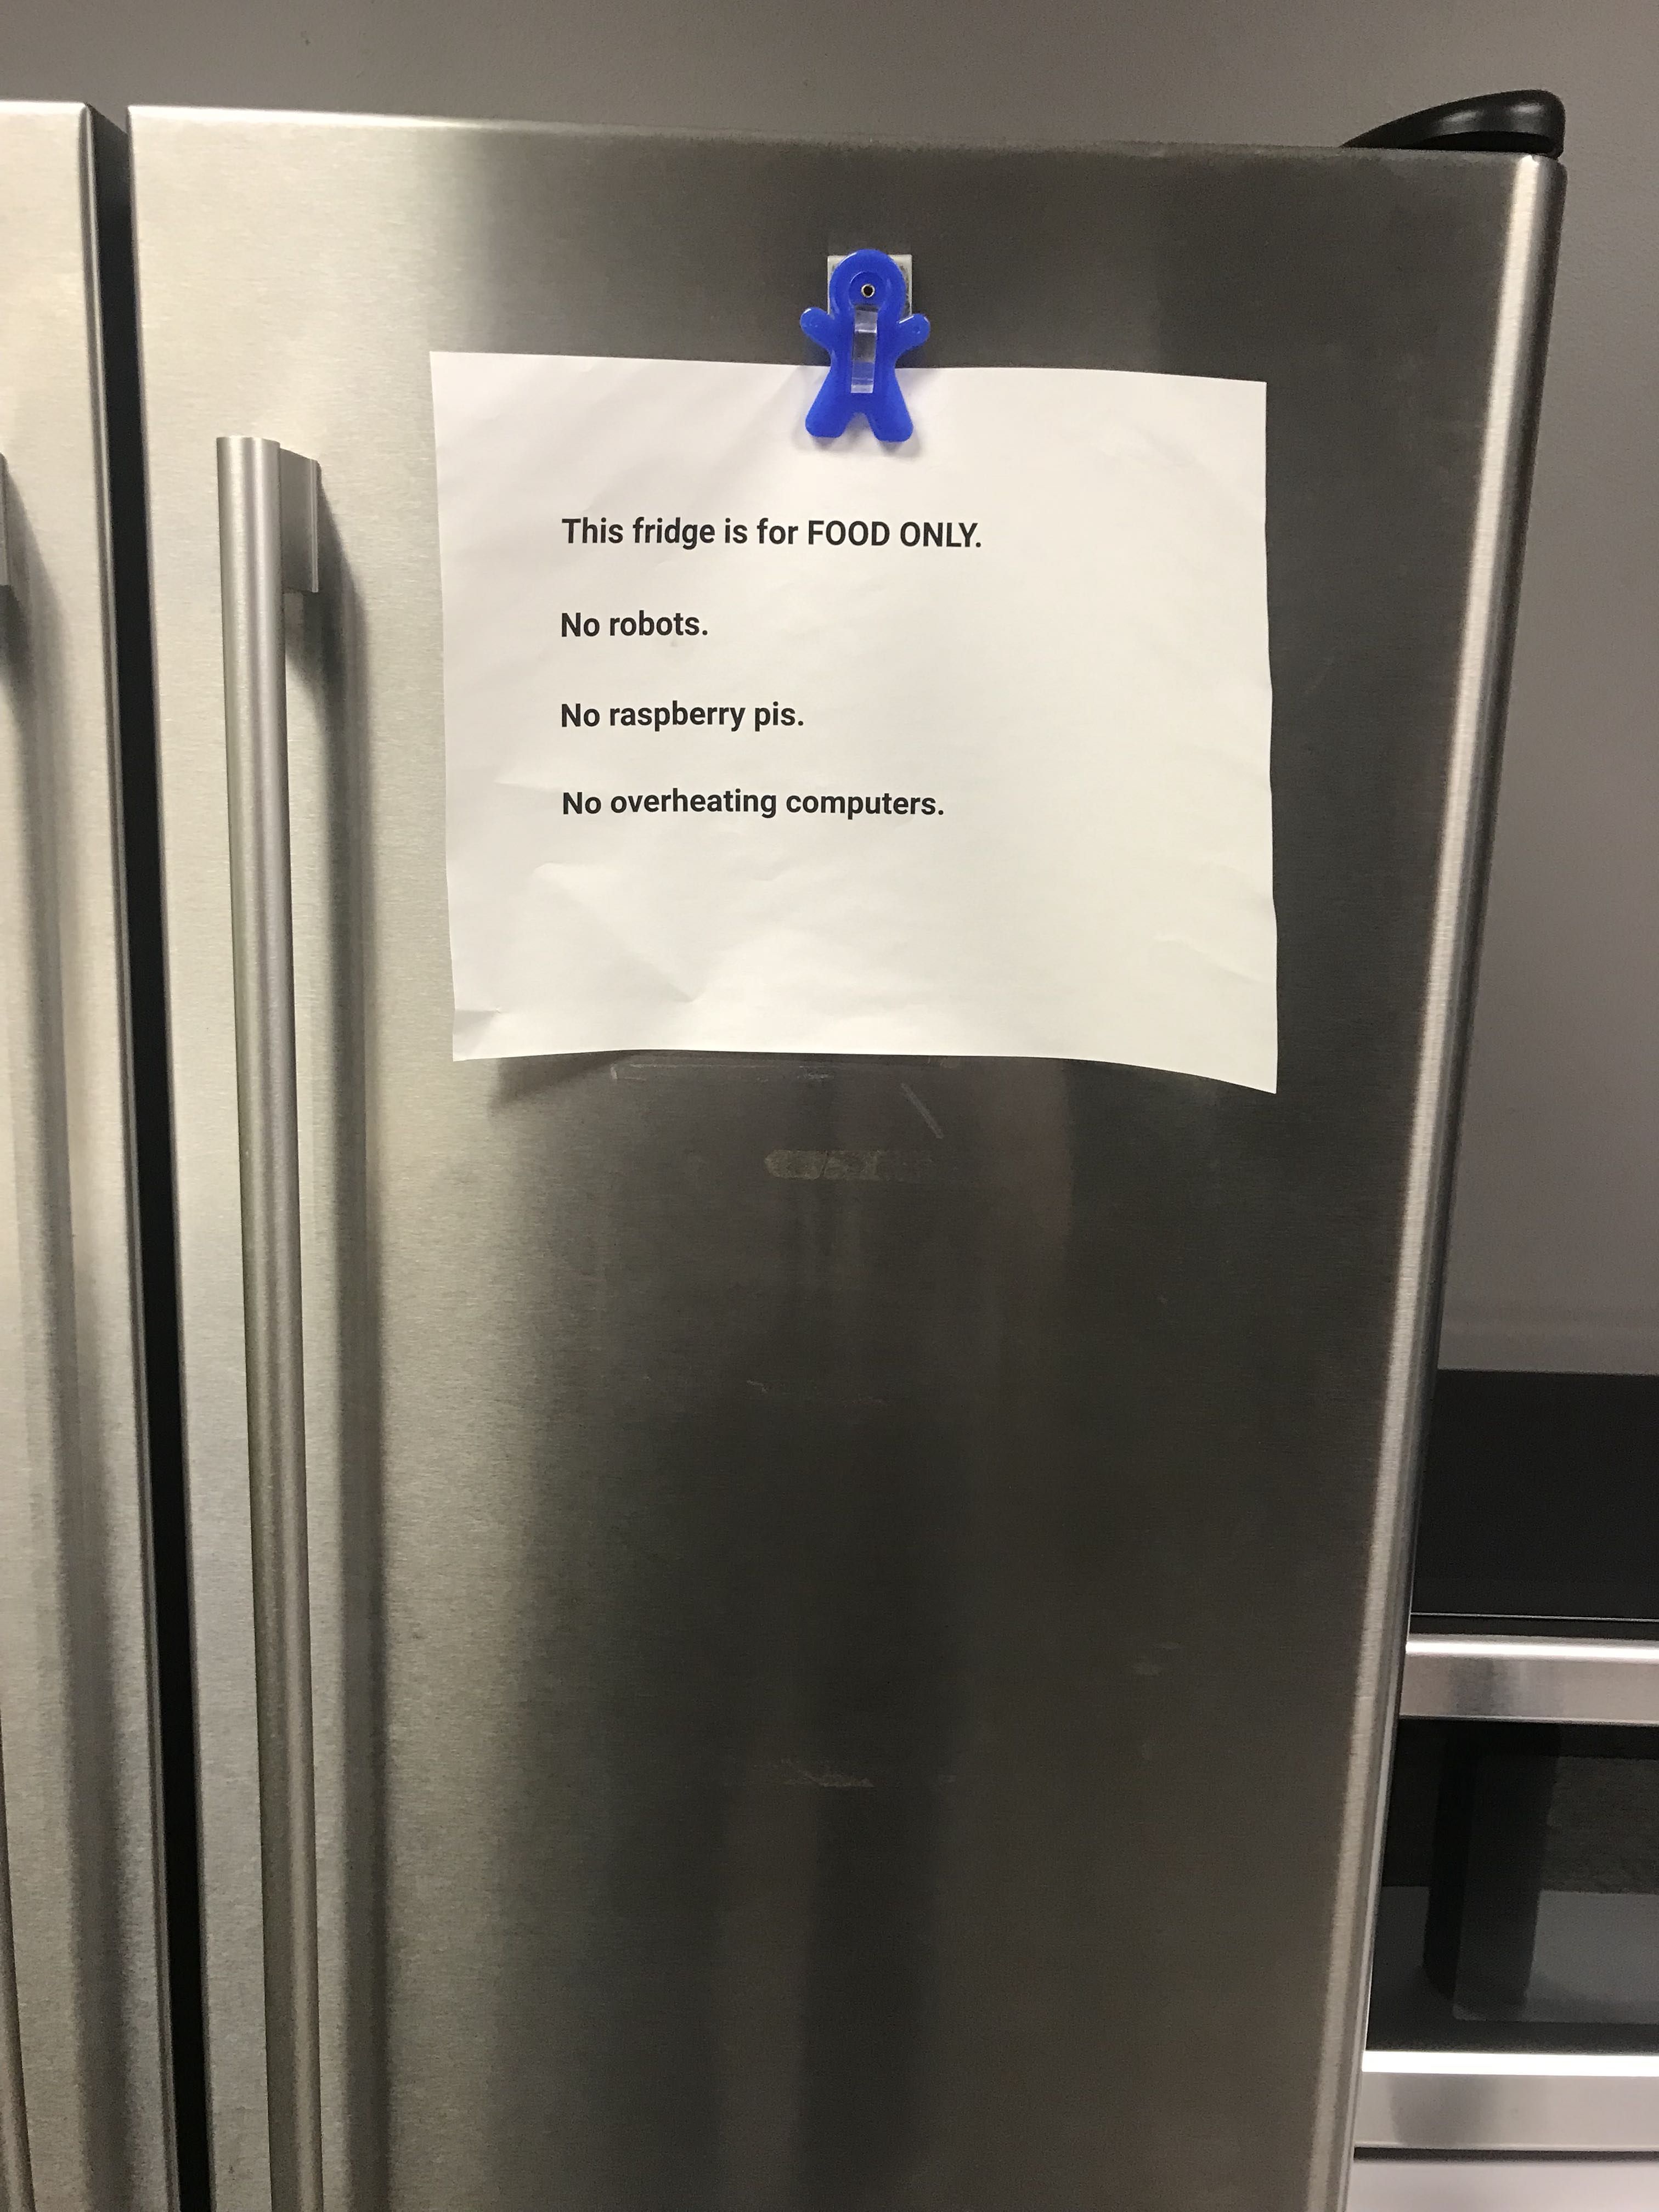 NASA break room problems are different than most. Taken today @ Johnson Space Center.